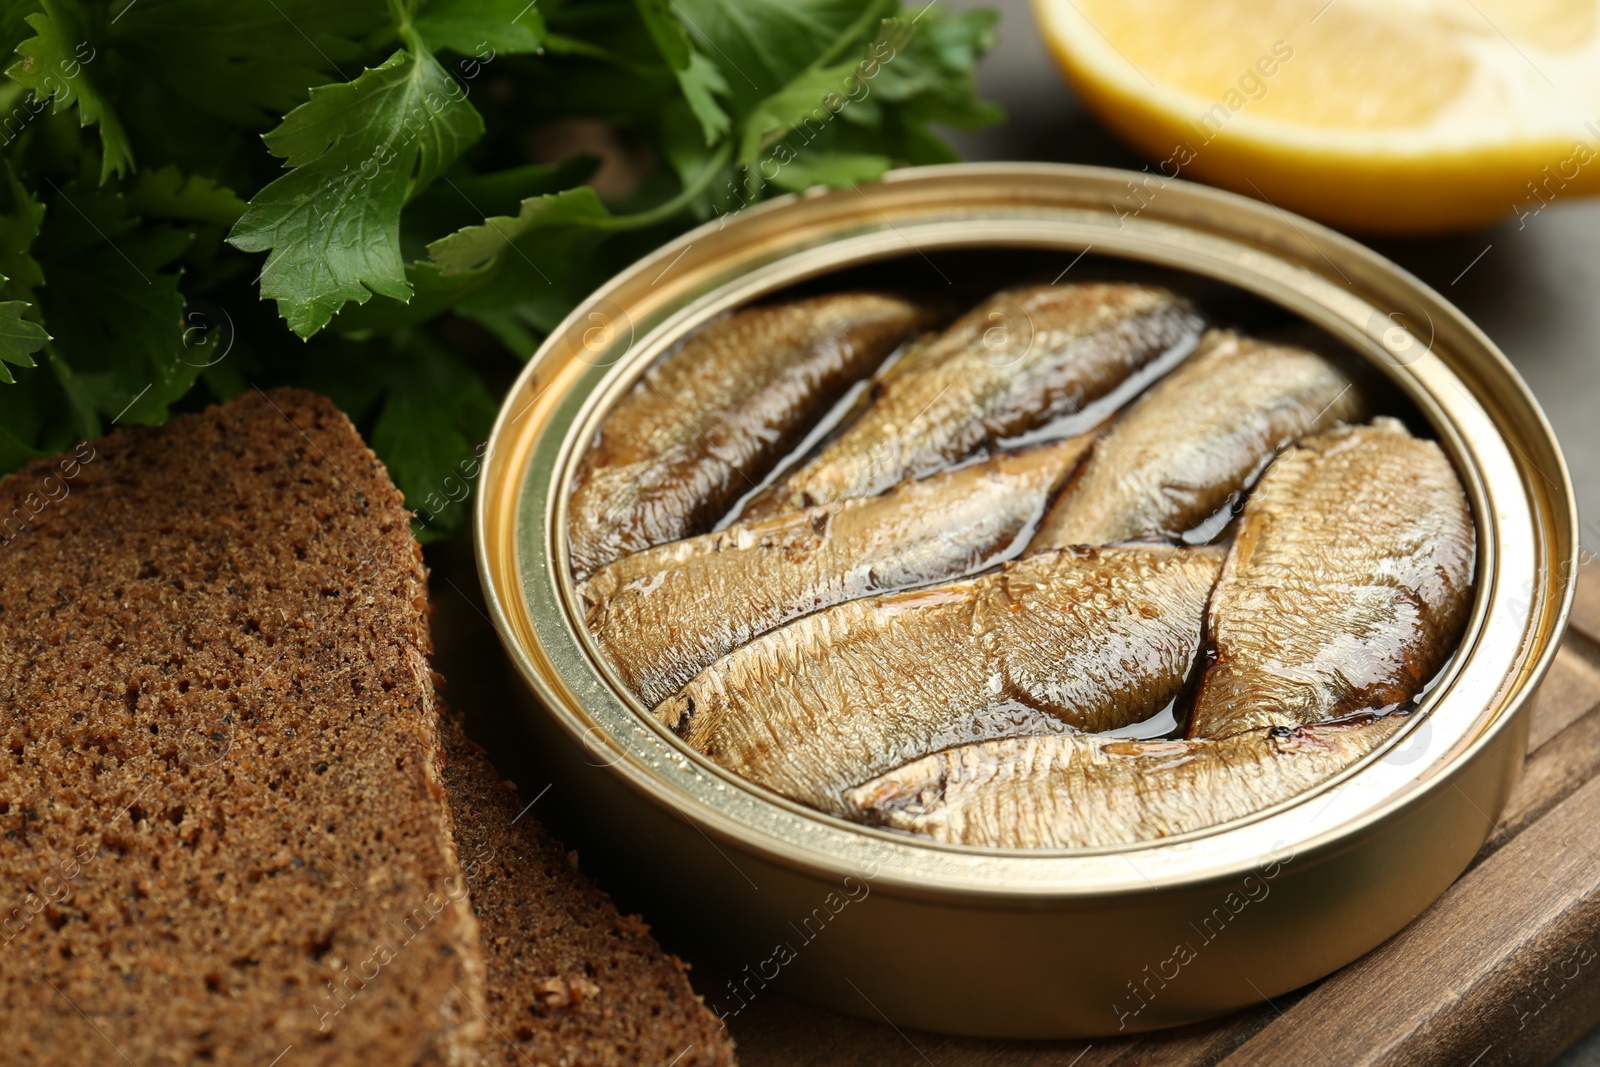 Photo of Tin can with tasty sprats served on wooden board, closeup